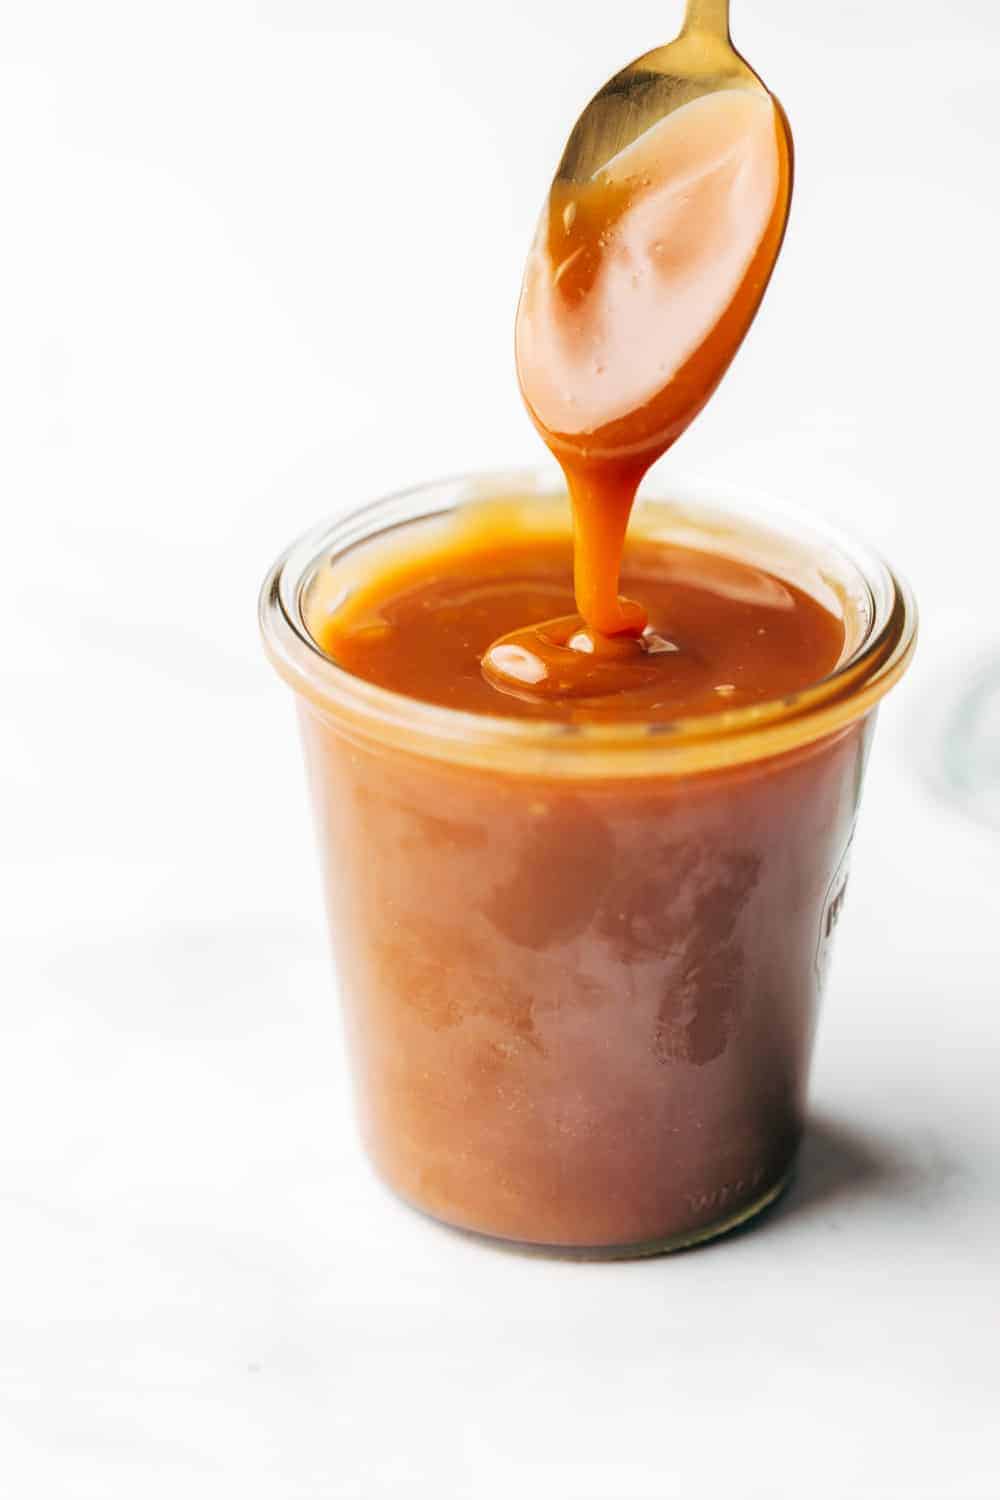 It is easy to learn how to make caramel sauce! It only takes a few minutes and a few key ingredients